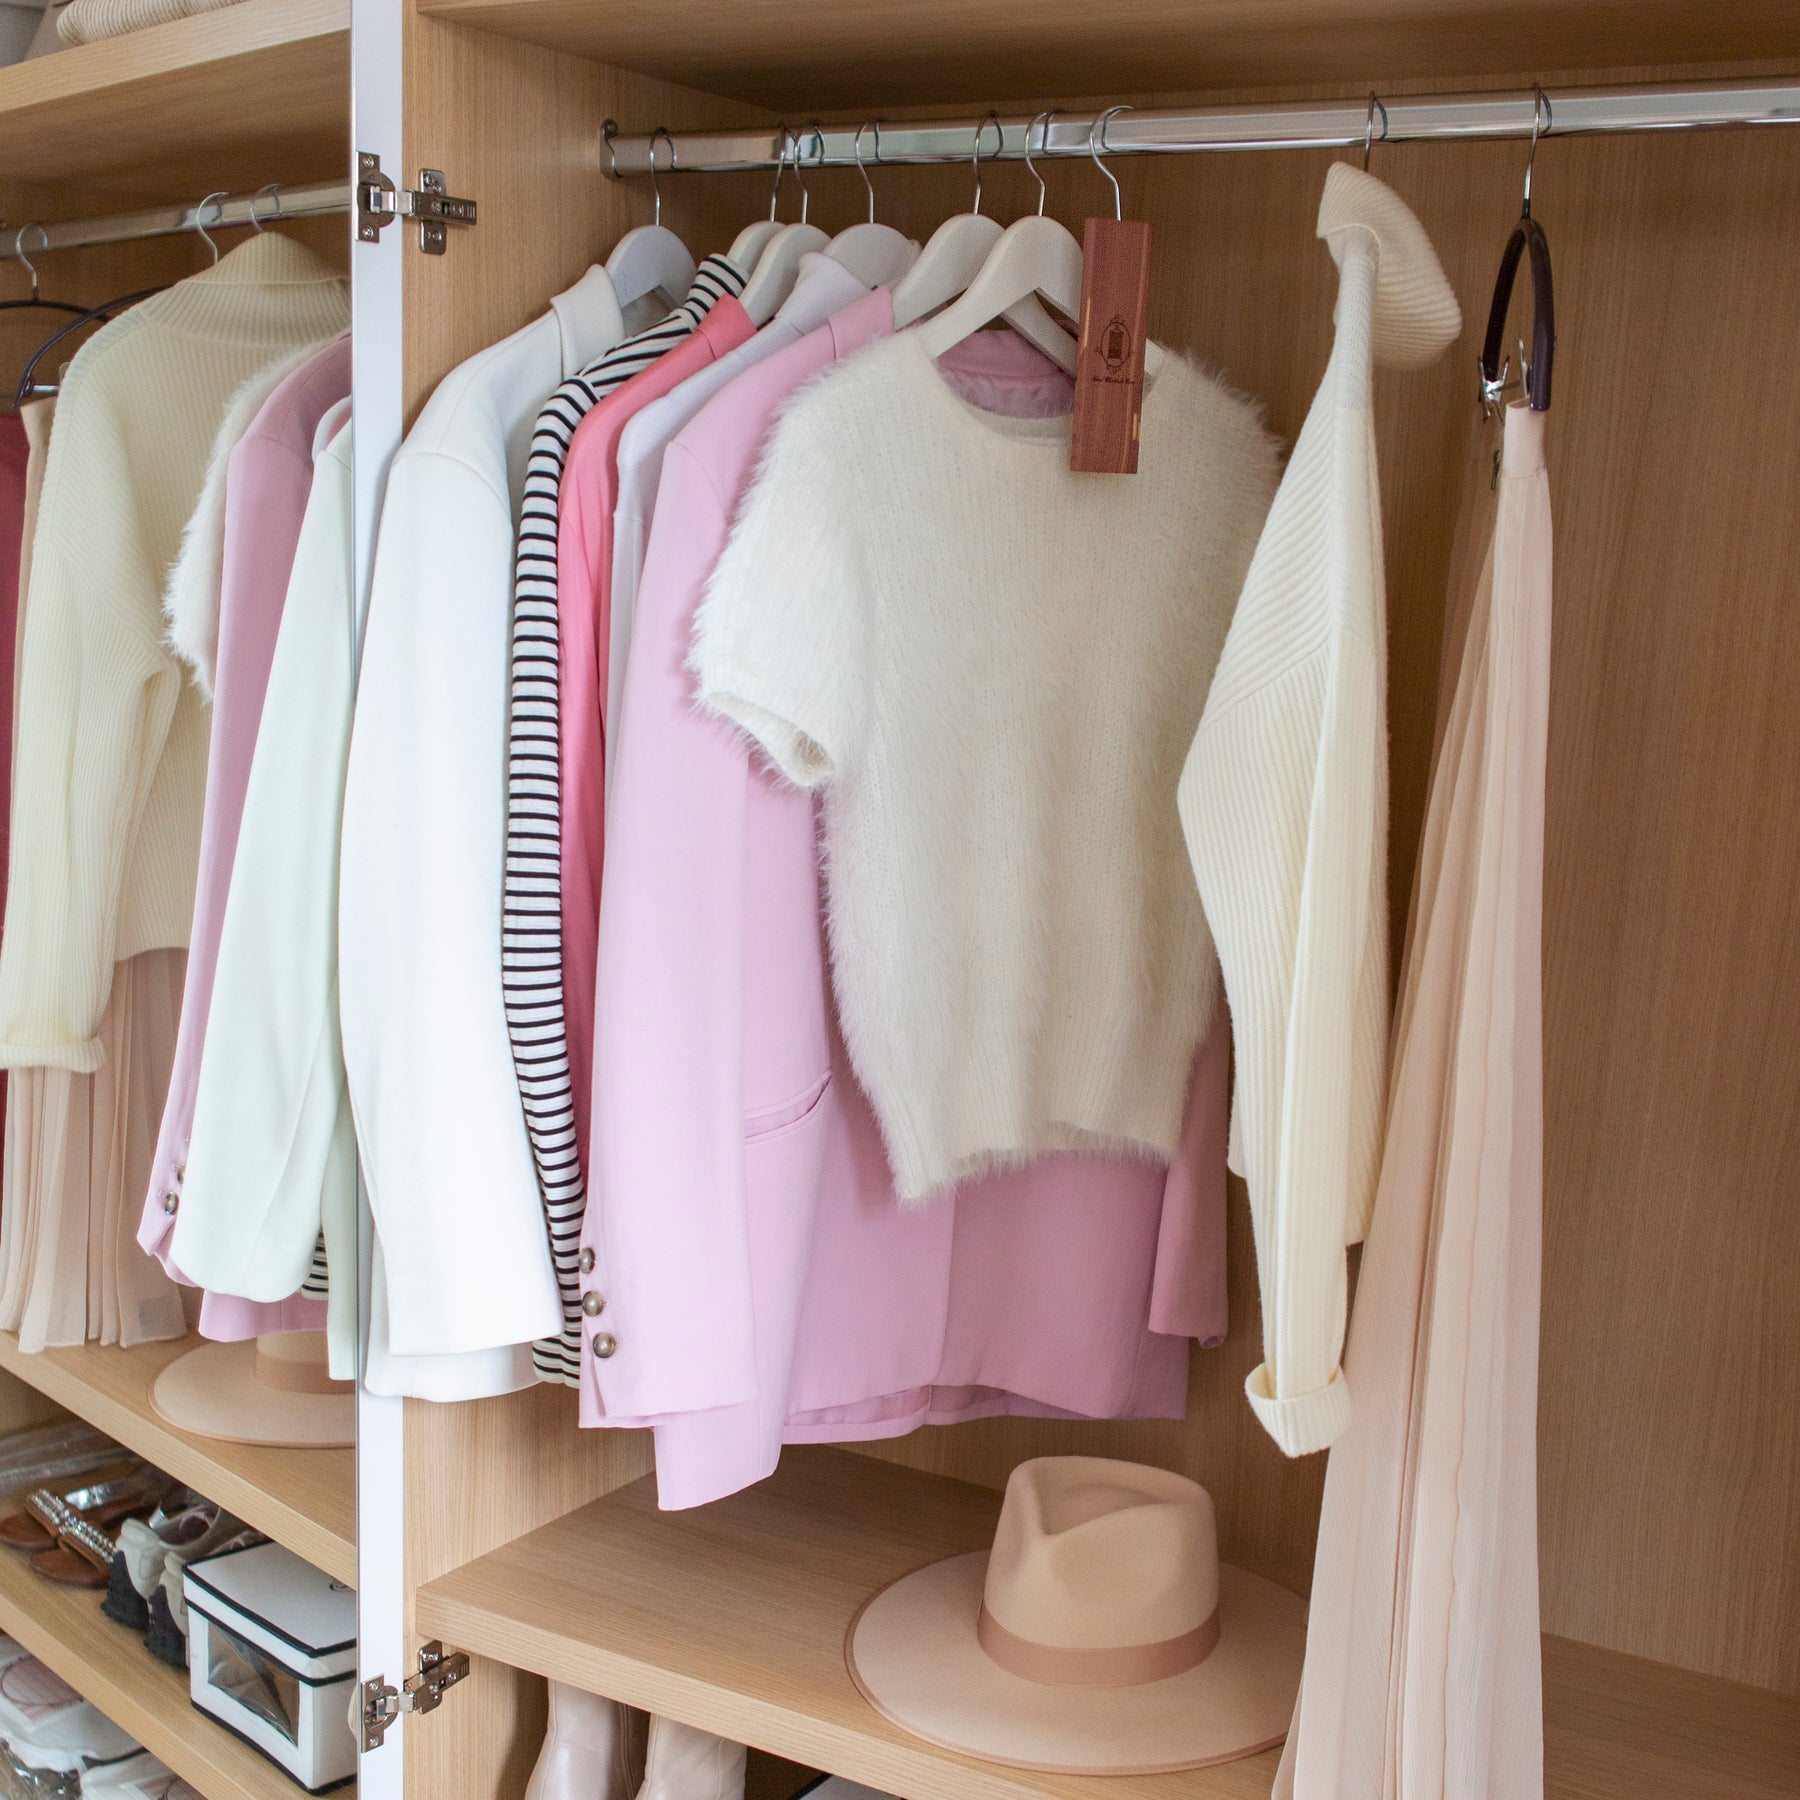 View of open wardrobe with light coloured clothing hanging on rail beside cedarwood hanging block